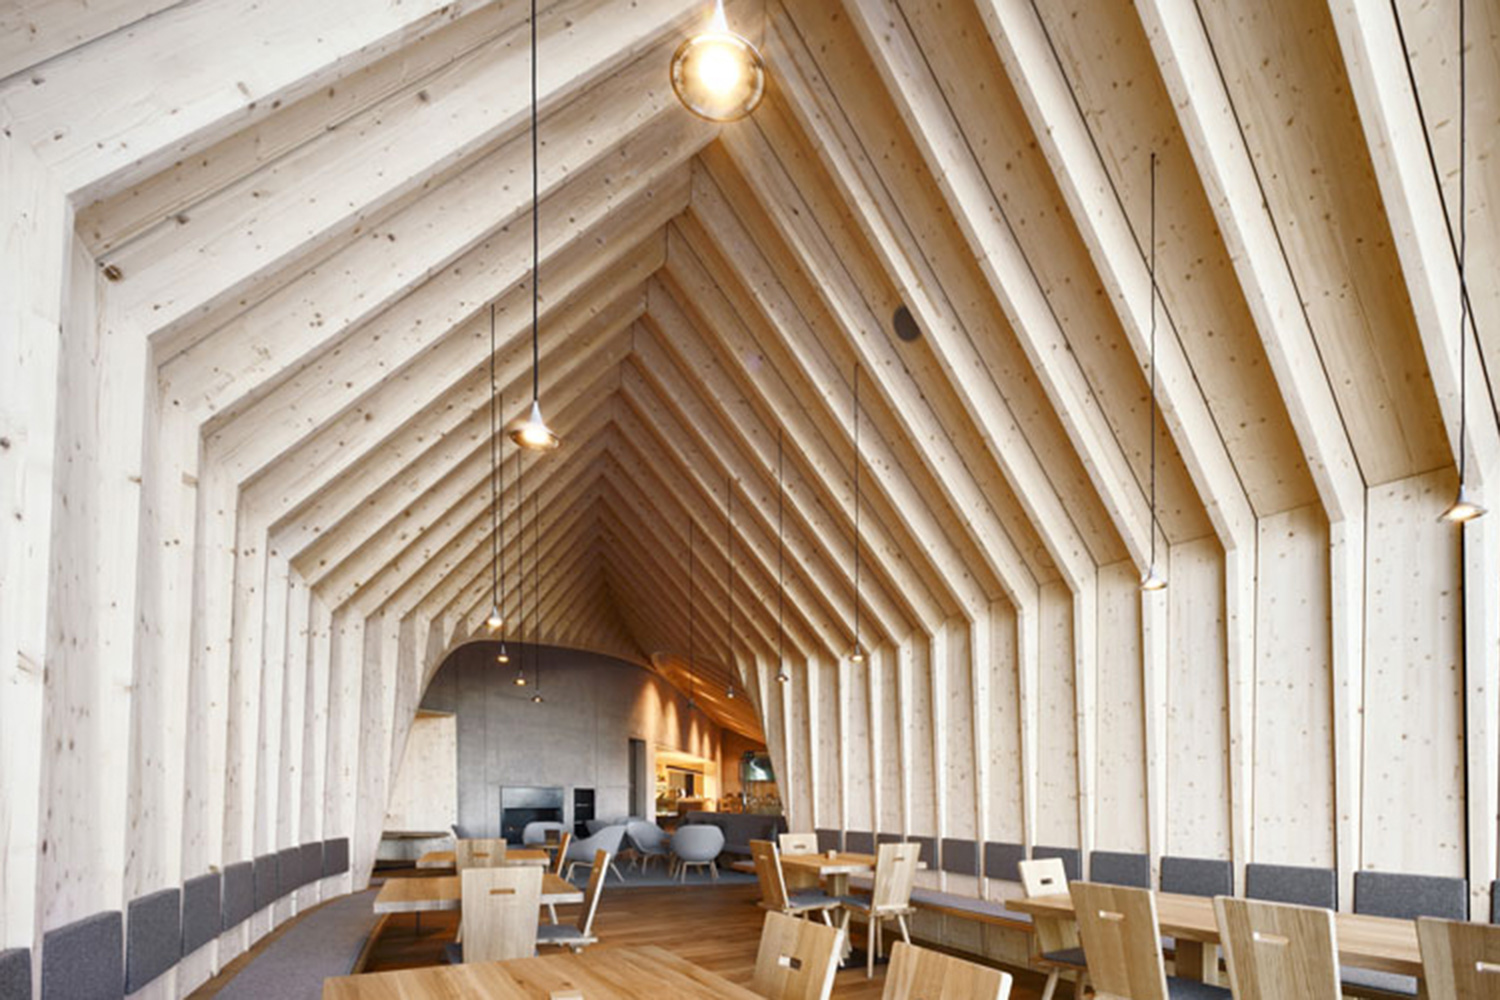 oberholz mountain hut italy peter pichler architecture 12